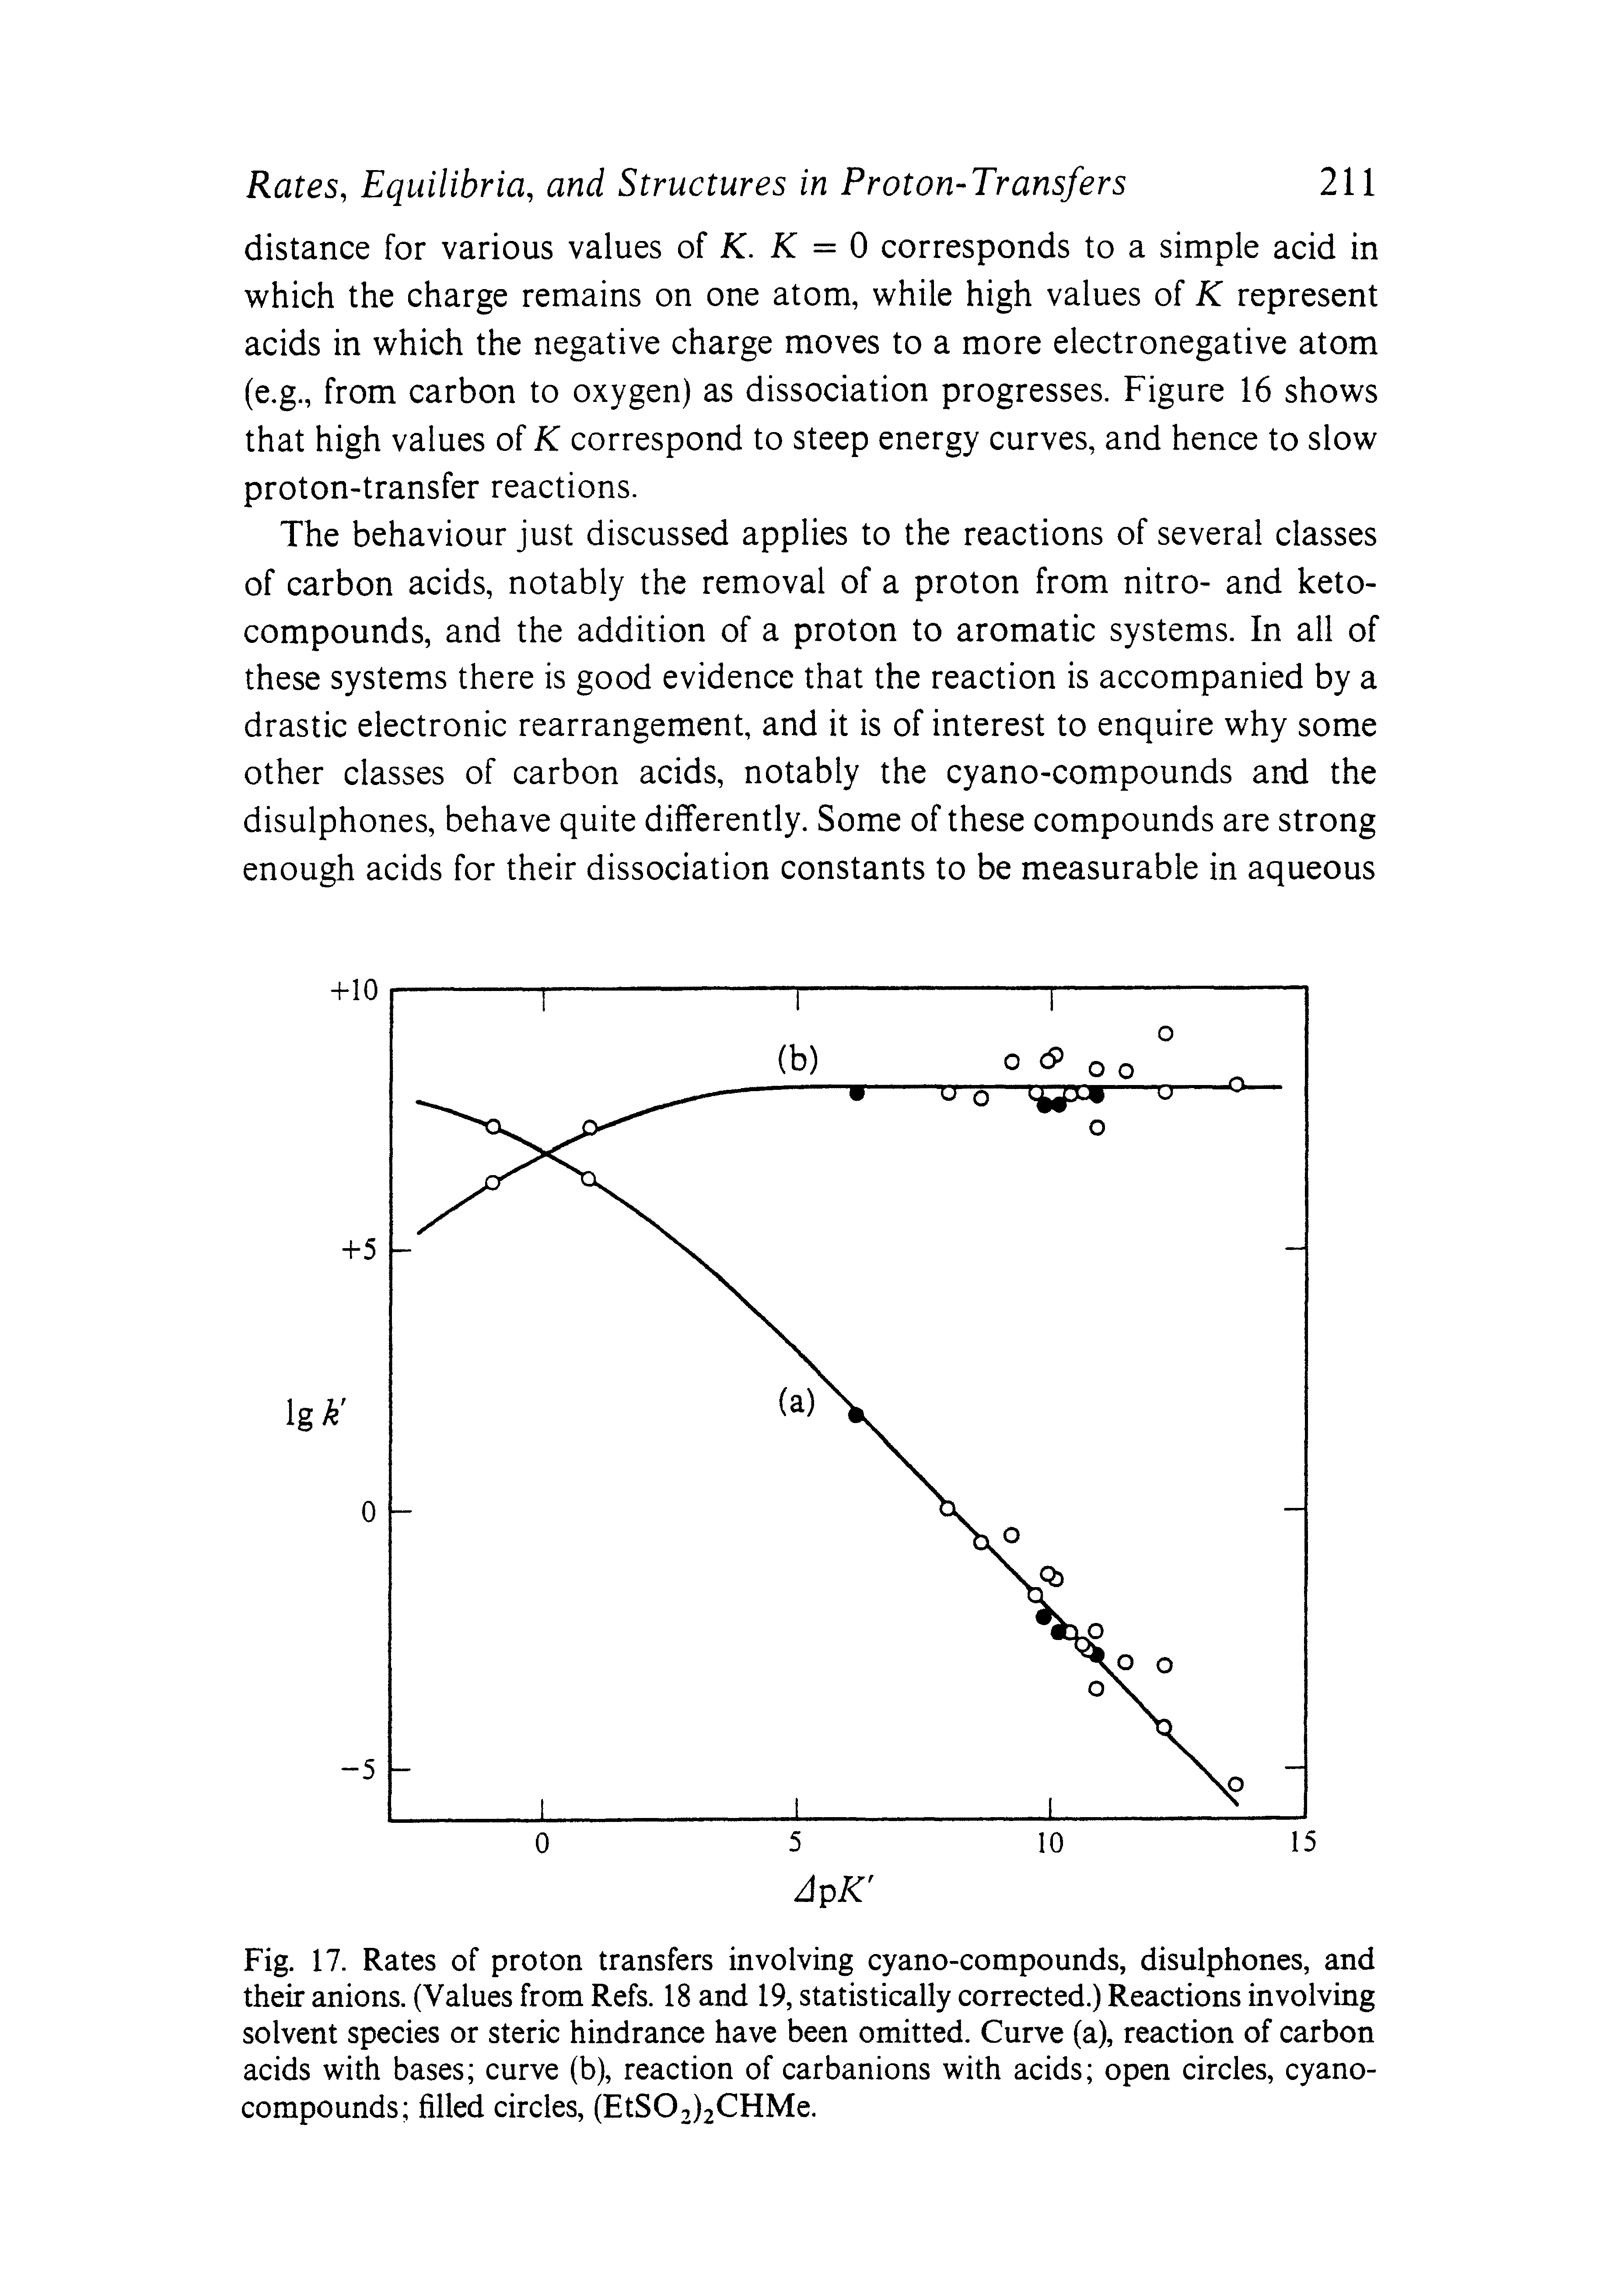 Fig. 17. Rates of proton transfers involving cyano-compounds, disulphones, and their anions. (Values from Refs. 18 and 19, statistically corrected.) Reactions involving solvent species or steric hindrance have been omitted. Curve (a), reaction of carbon acids with bases curve (b), reaction of carbanions with acids open circles, cyano-compounds filled circles, (EtS02)2CHMe.